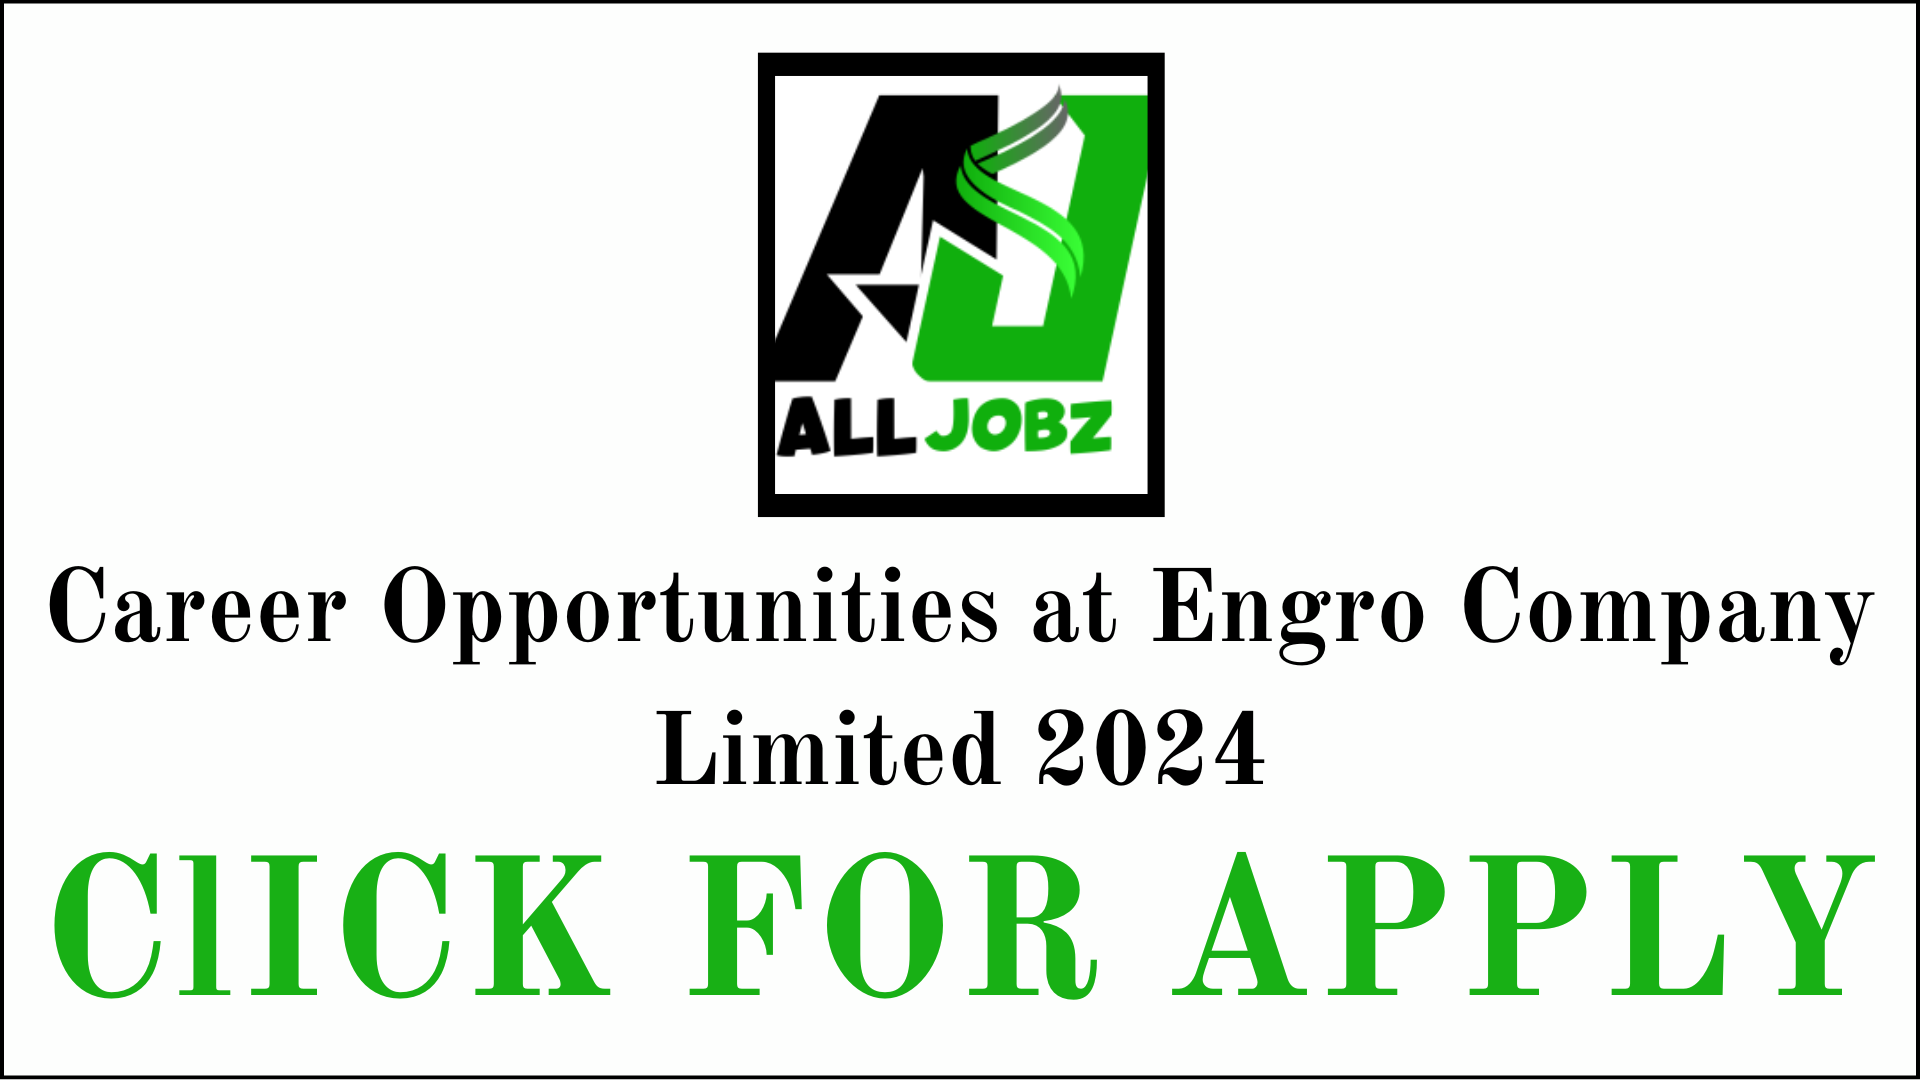 Exciting Career Opportunities At Engro Company Limited, Exciting Career Opportunities At Engro Company Limited 2024 Exciting Career Opportunities At Engro Company Limited Salary, Exciting Career Opportunities At Engro Company Limited Pakistan, Career Opportunities At Engro Company Limited, Engro Corporation Jobs 2024, Engro Fertilizer Jobs 2024 Online Apply, Engro Internship 2024, Engro Trainee Program 2024, Engro Energy Careers,